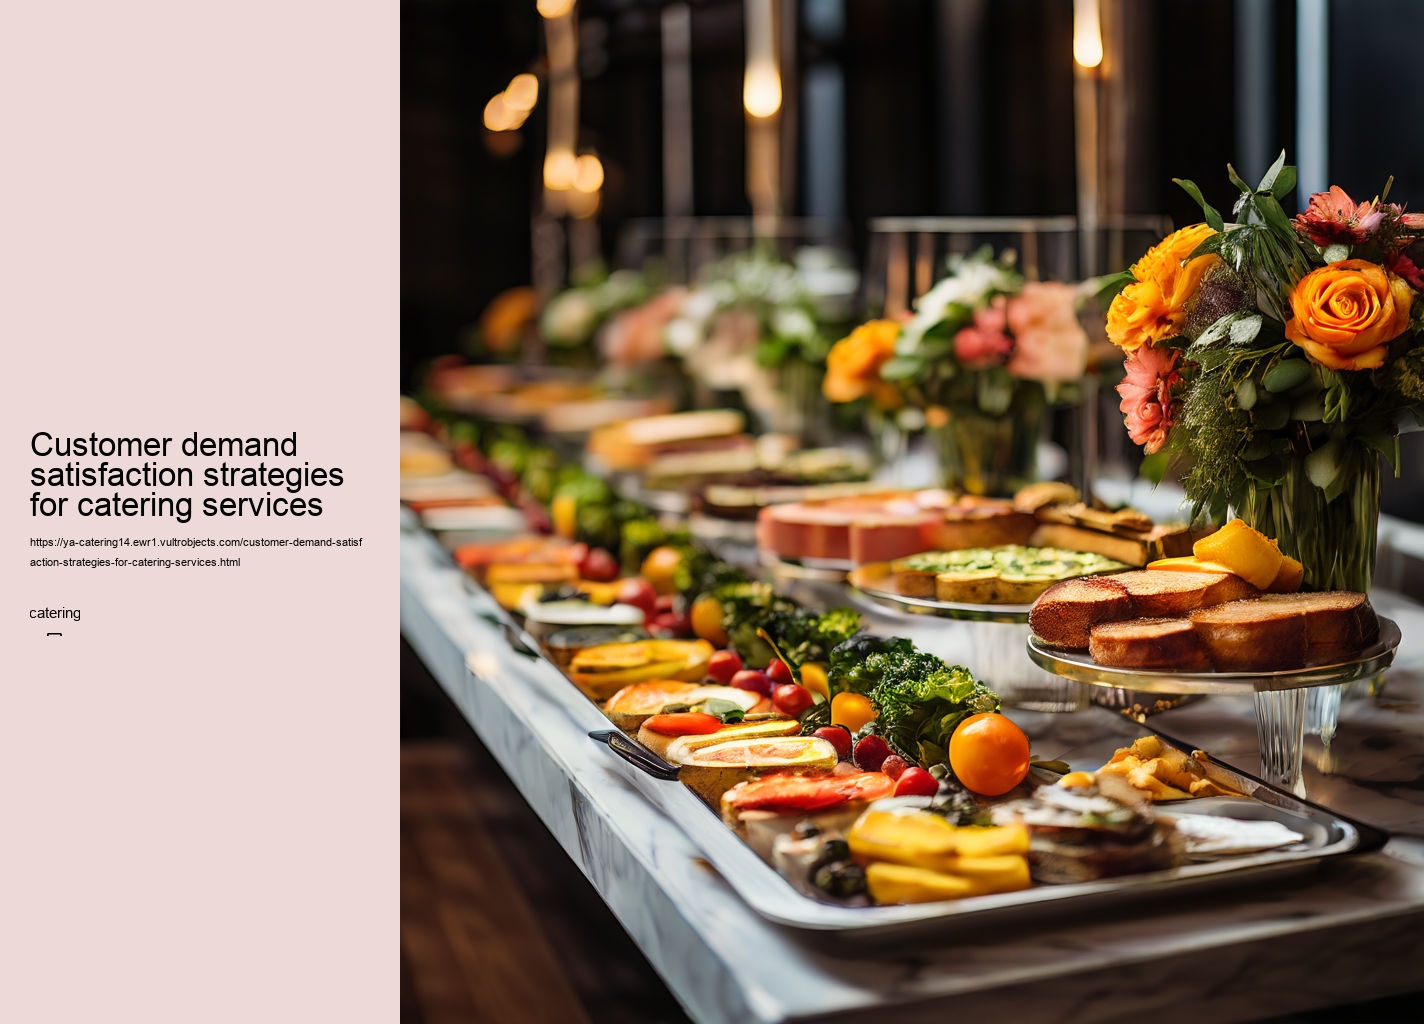 Customer demand satisfaction strategies for catering services